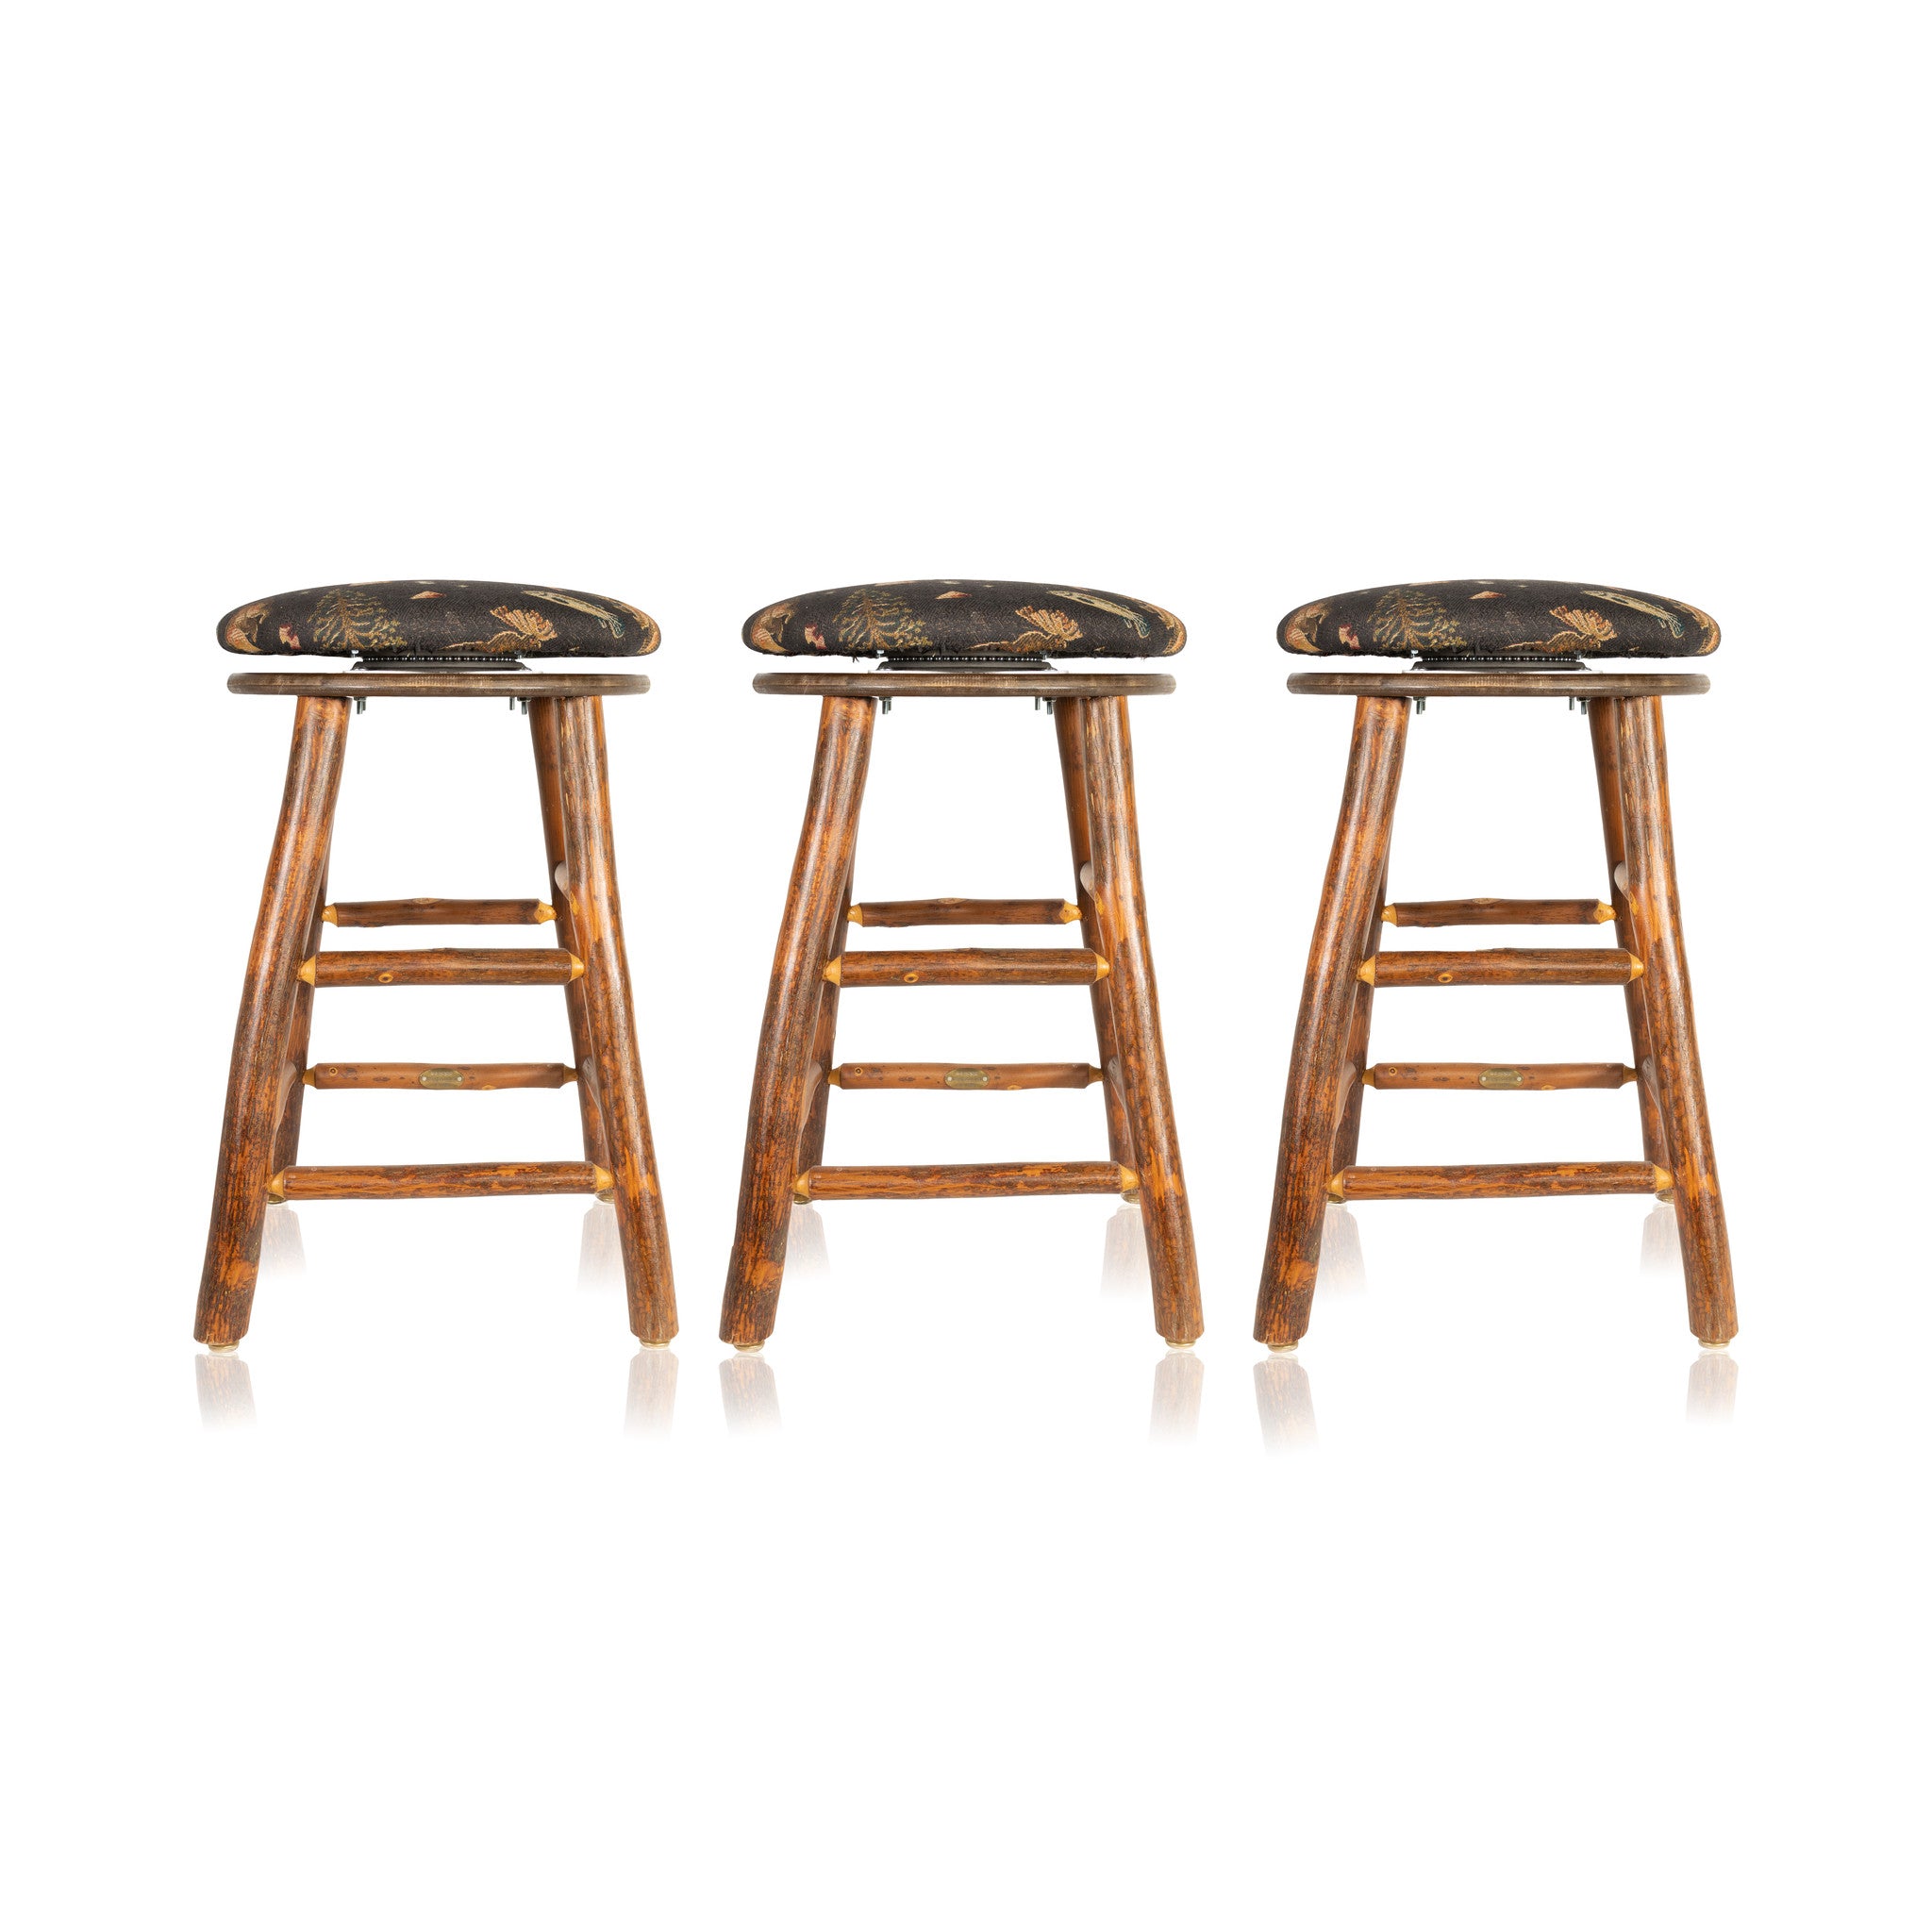 Old Hickory Swivel Bar Stools, Furnishings, Furniture, Chair